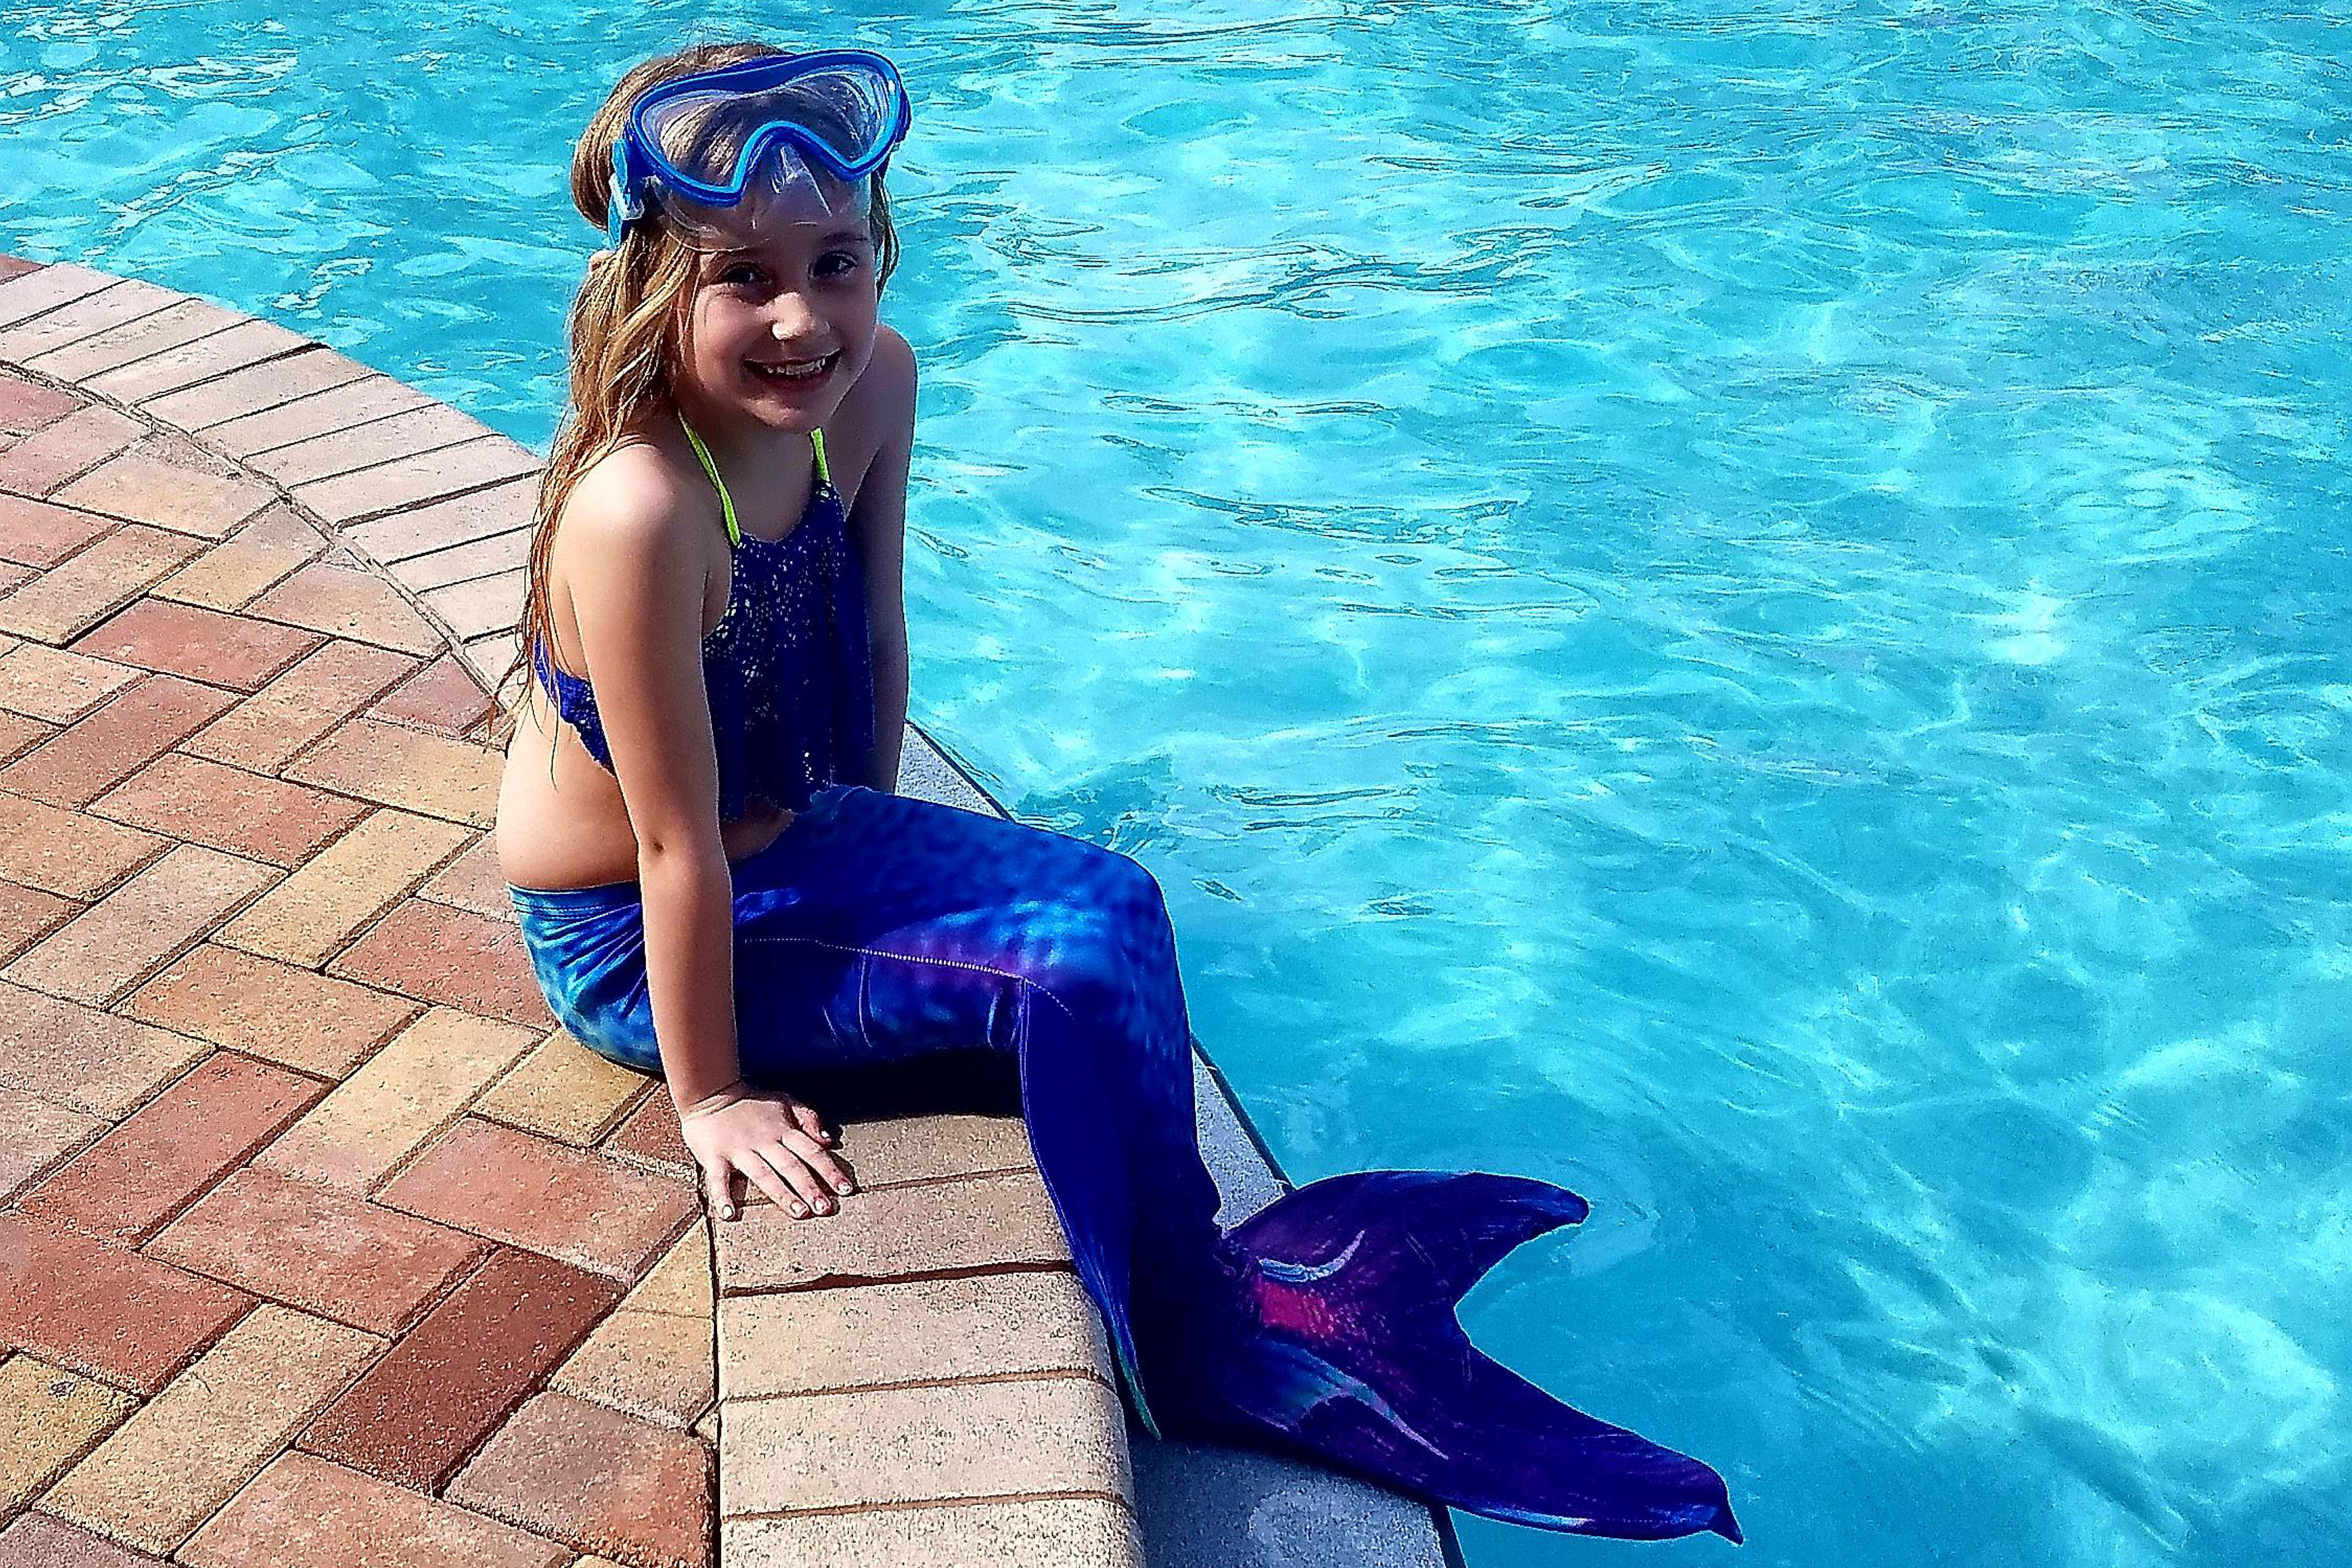 A little girl dressed as mermaid sitting by the pool - Westgate Town Center Resort